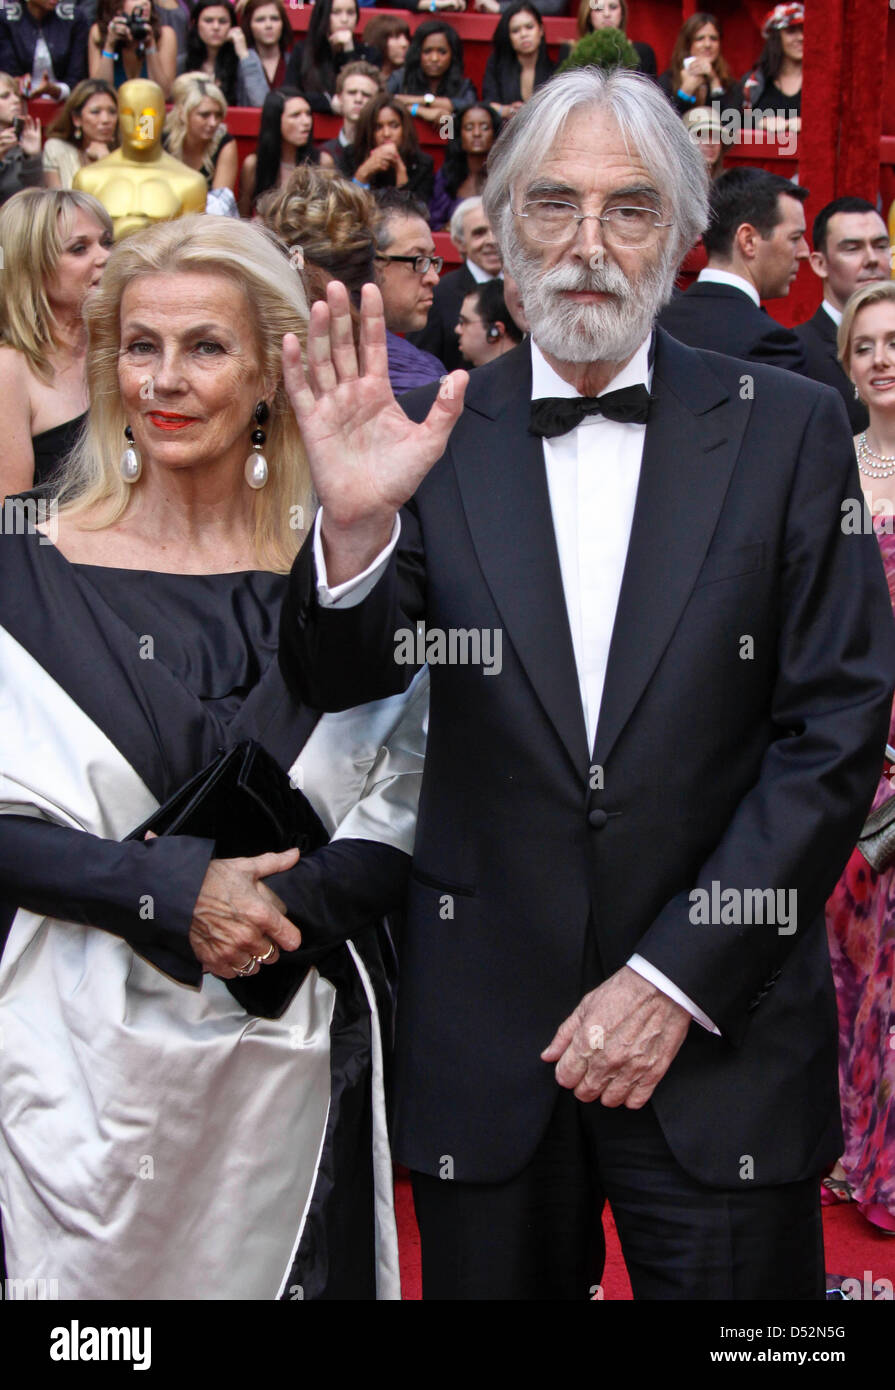 Austrian Director Michael Haneke and his wife Suzie arrive on the red carpet during the 82nd Annual Academy Awards at the Kodak Theatre in Hollywood, USA, 07 March 2010. The Oscars are awarded for outstanding individual or collective efforts in up to 25 categories in filmmaking. Photo: HUBERT BOESL Stock Photo